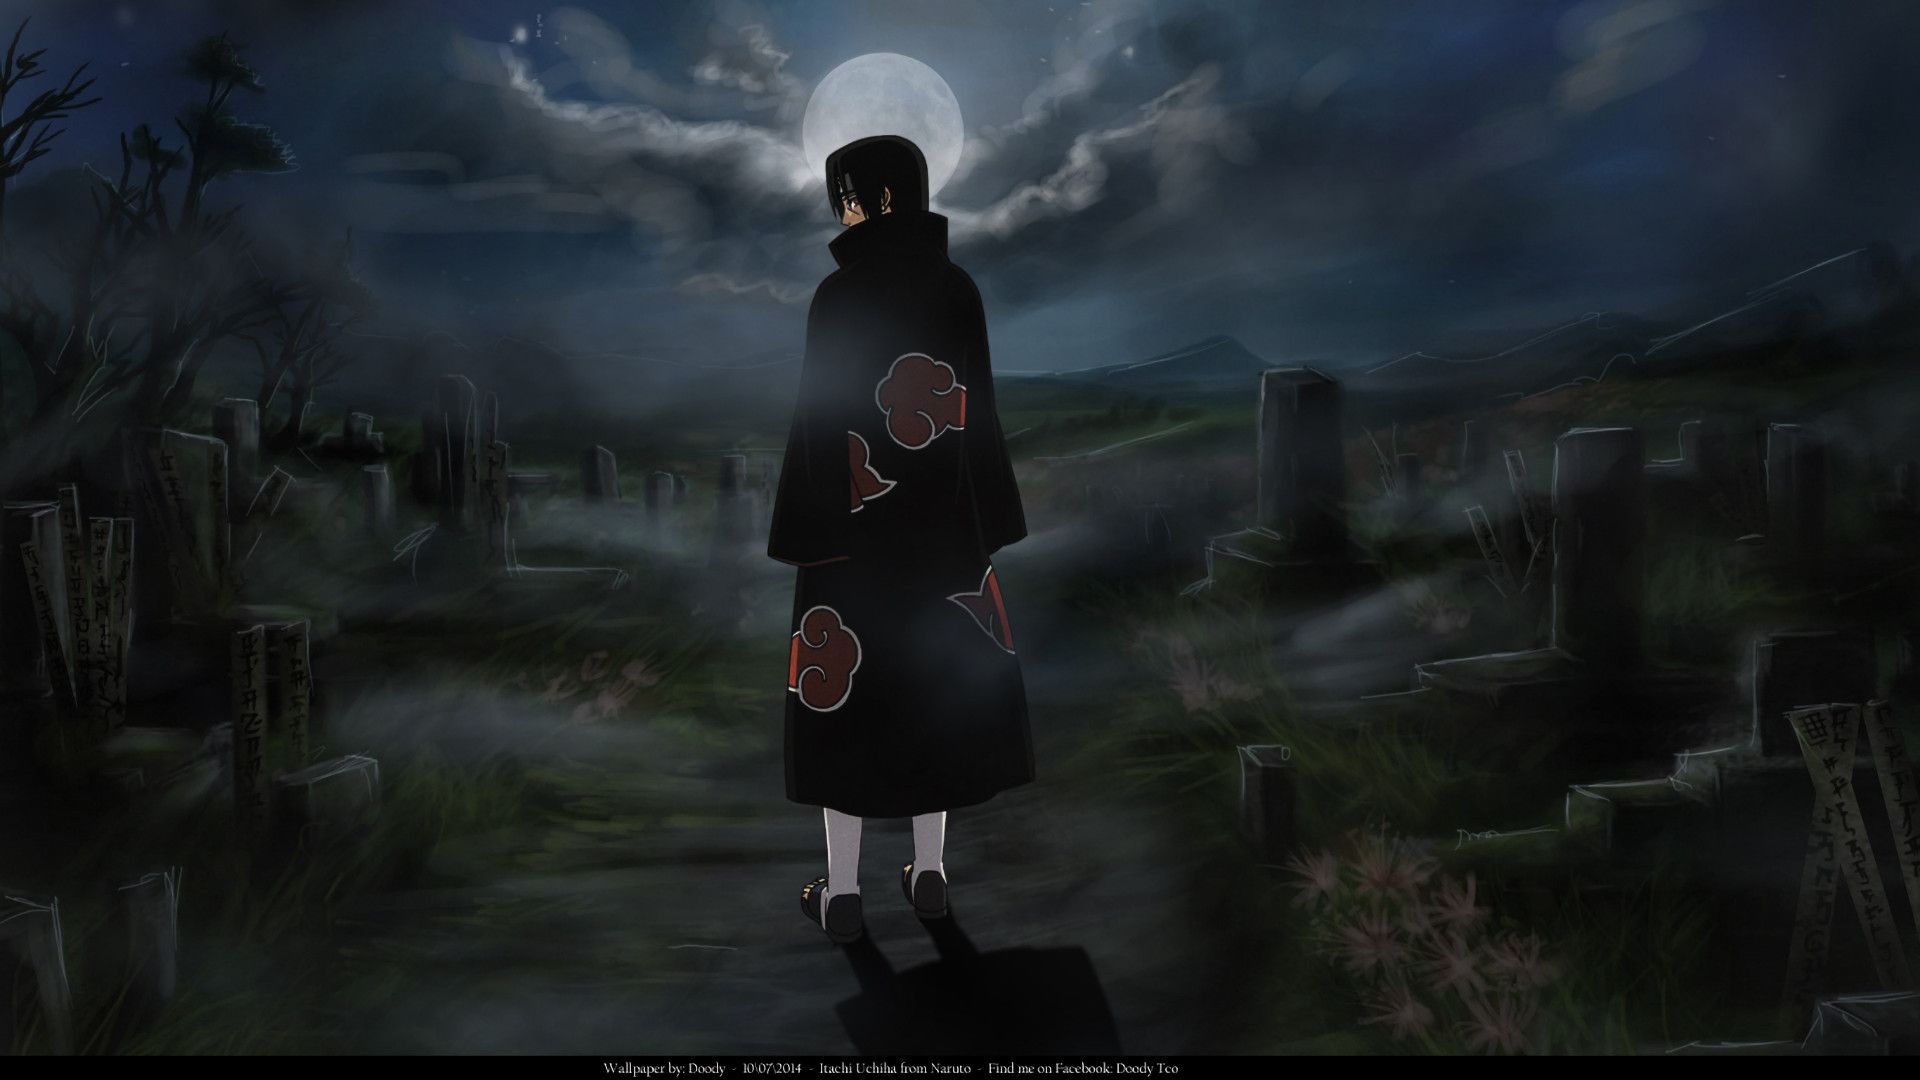 Ps4 Anime Itachi Wallpapers - Wallpaper Cave